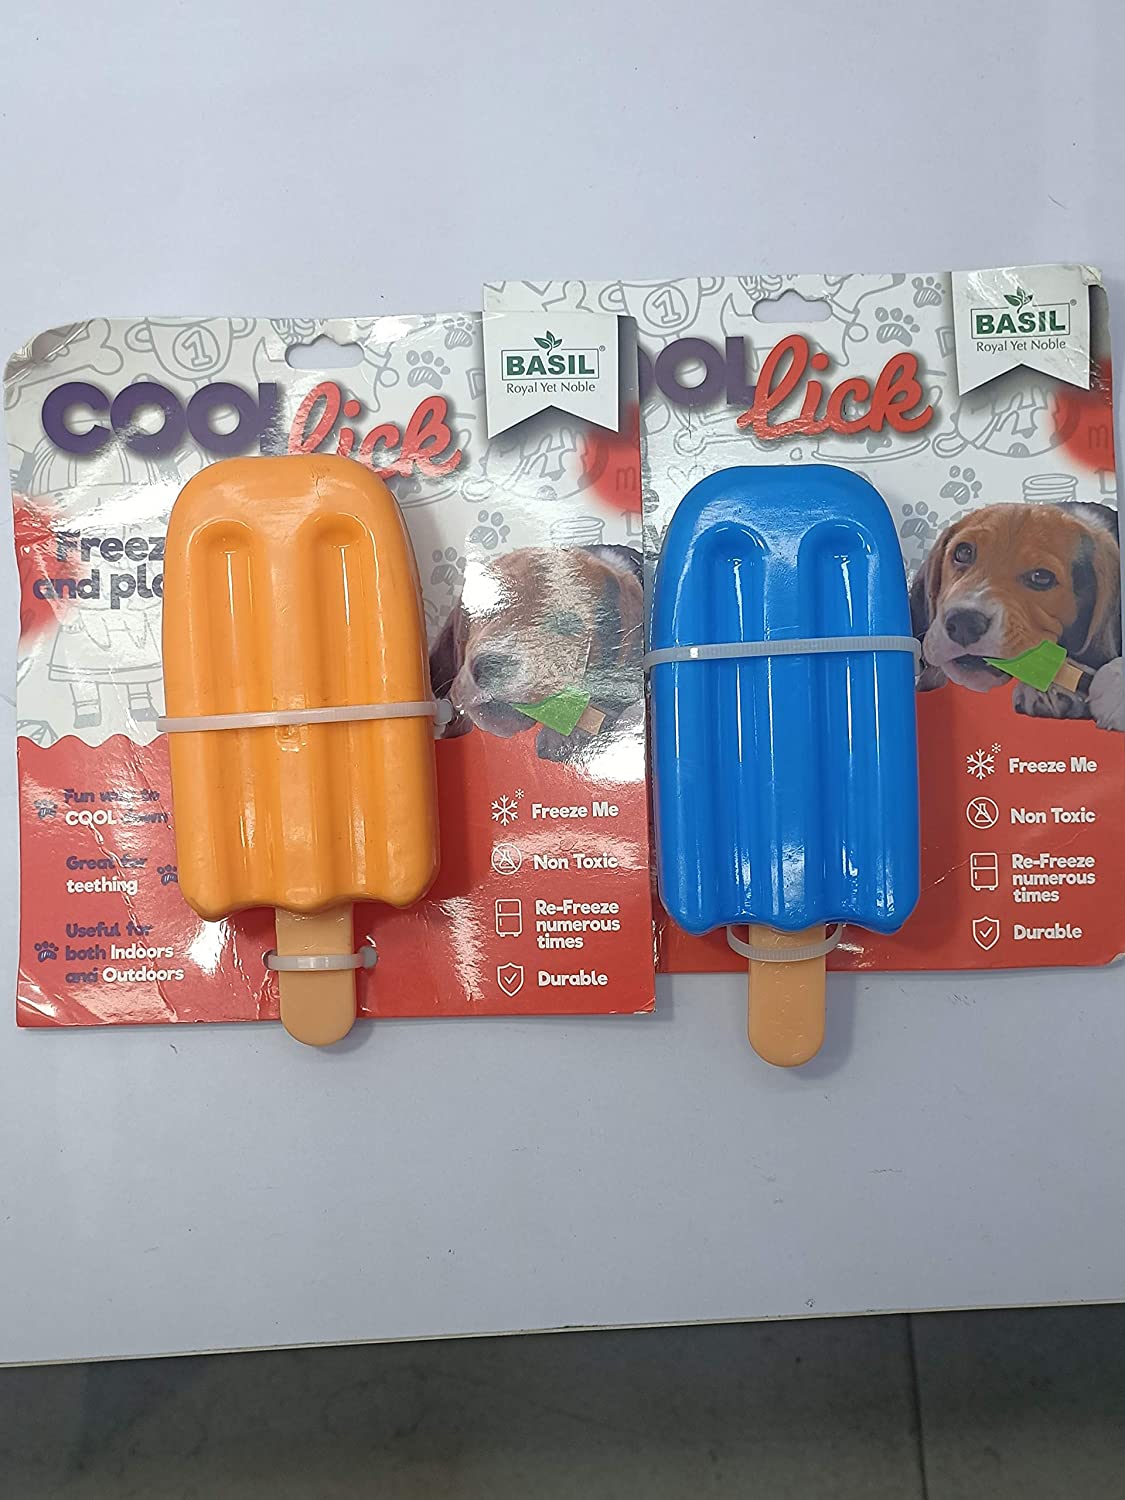 Cool Lick Freeze and Play Ice Cream Shape Toy for Dog by Basil